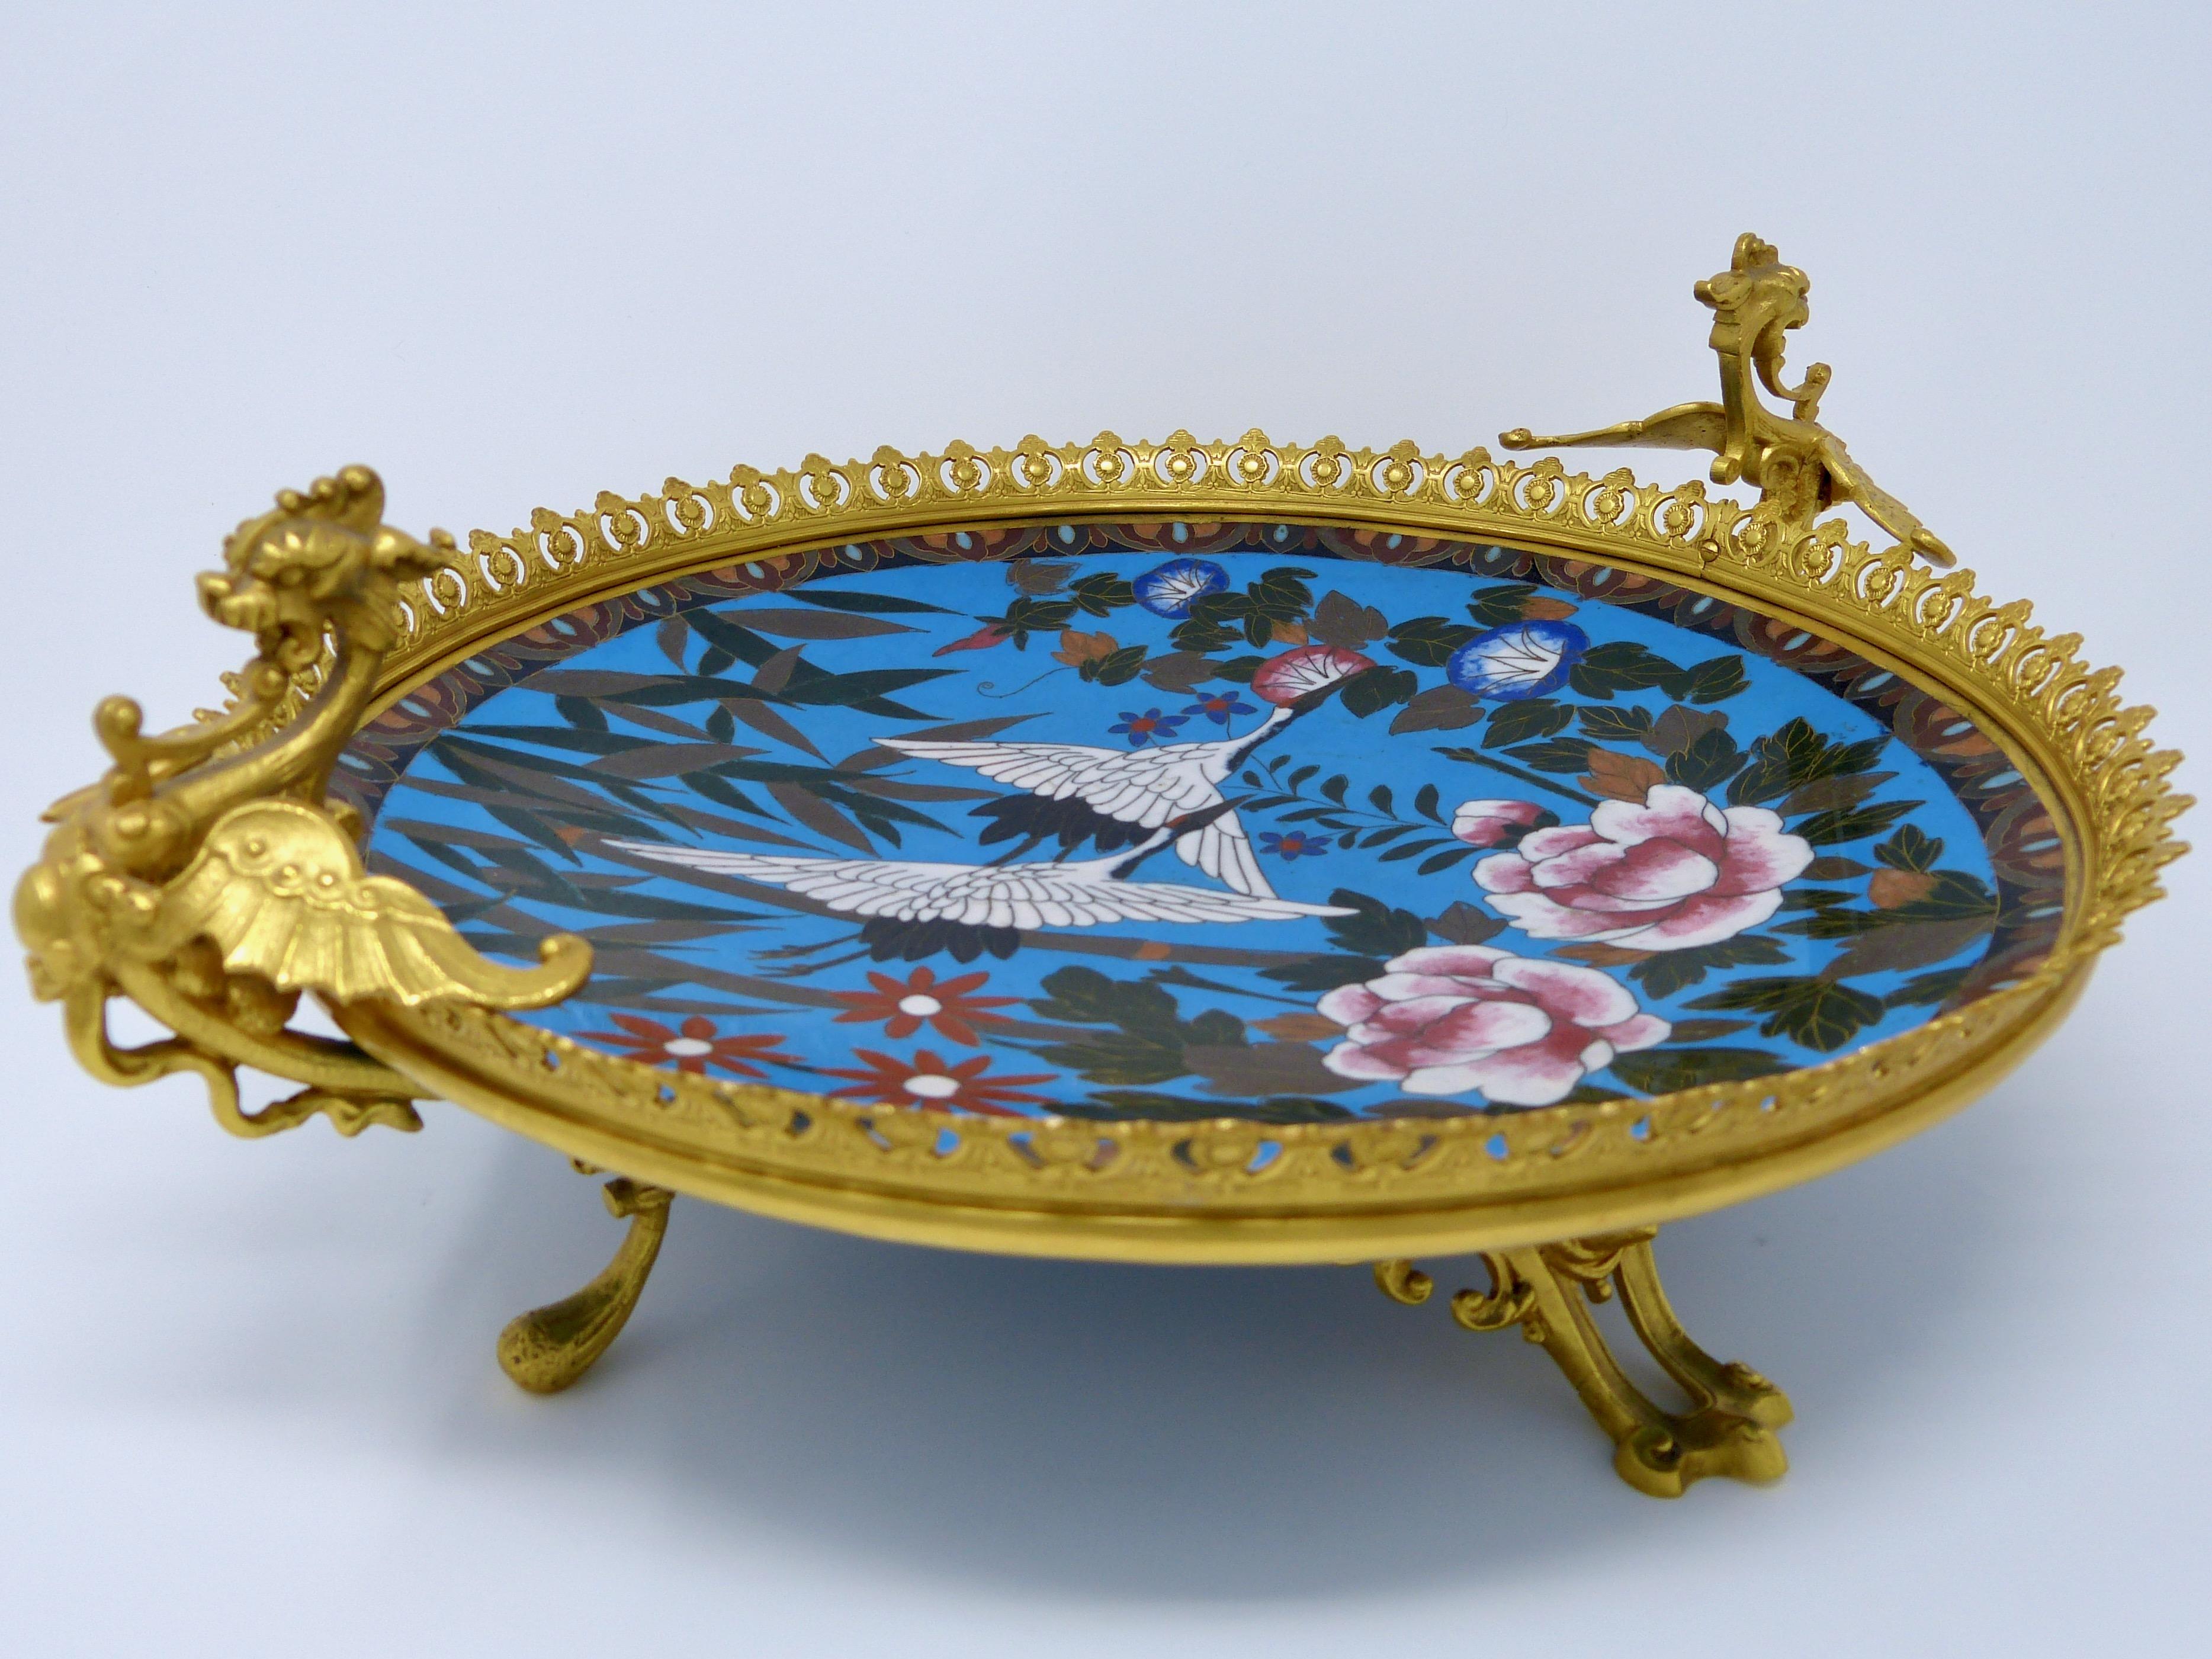 Antique gilt bronze and cloisonné plate
Made in France, late 19th century
Very good conditions.
      